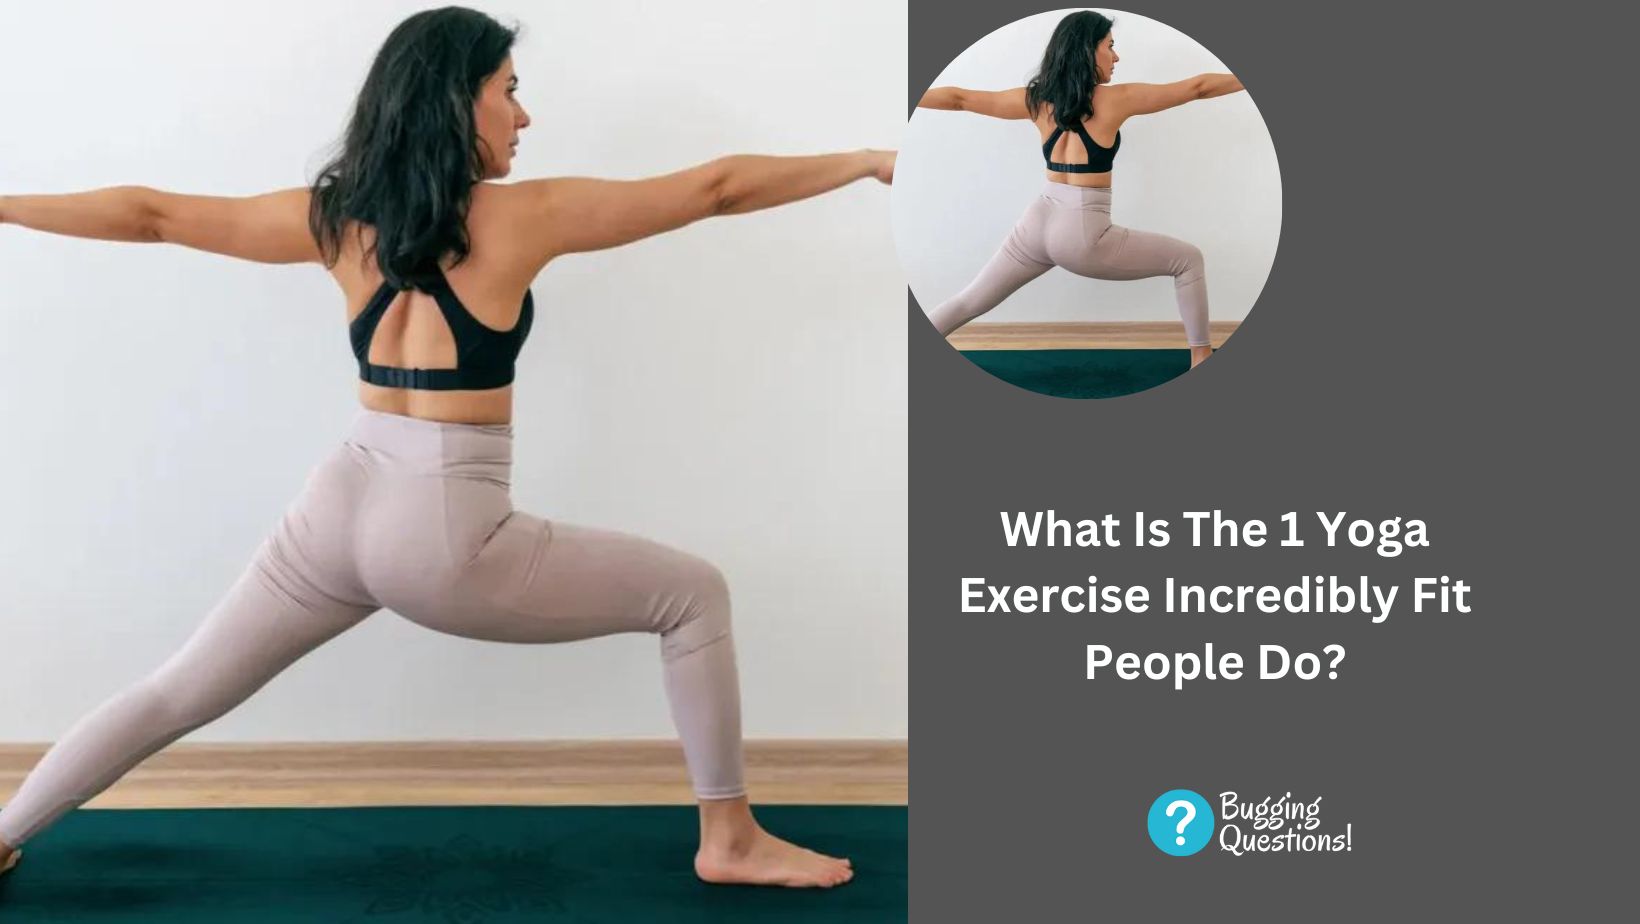 What Is The 1 Yoga Exercise Incredibly Fit People Do?